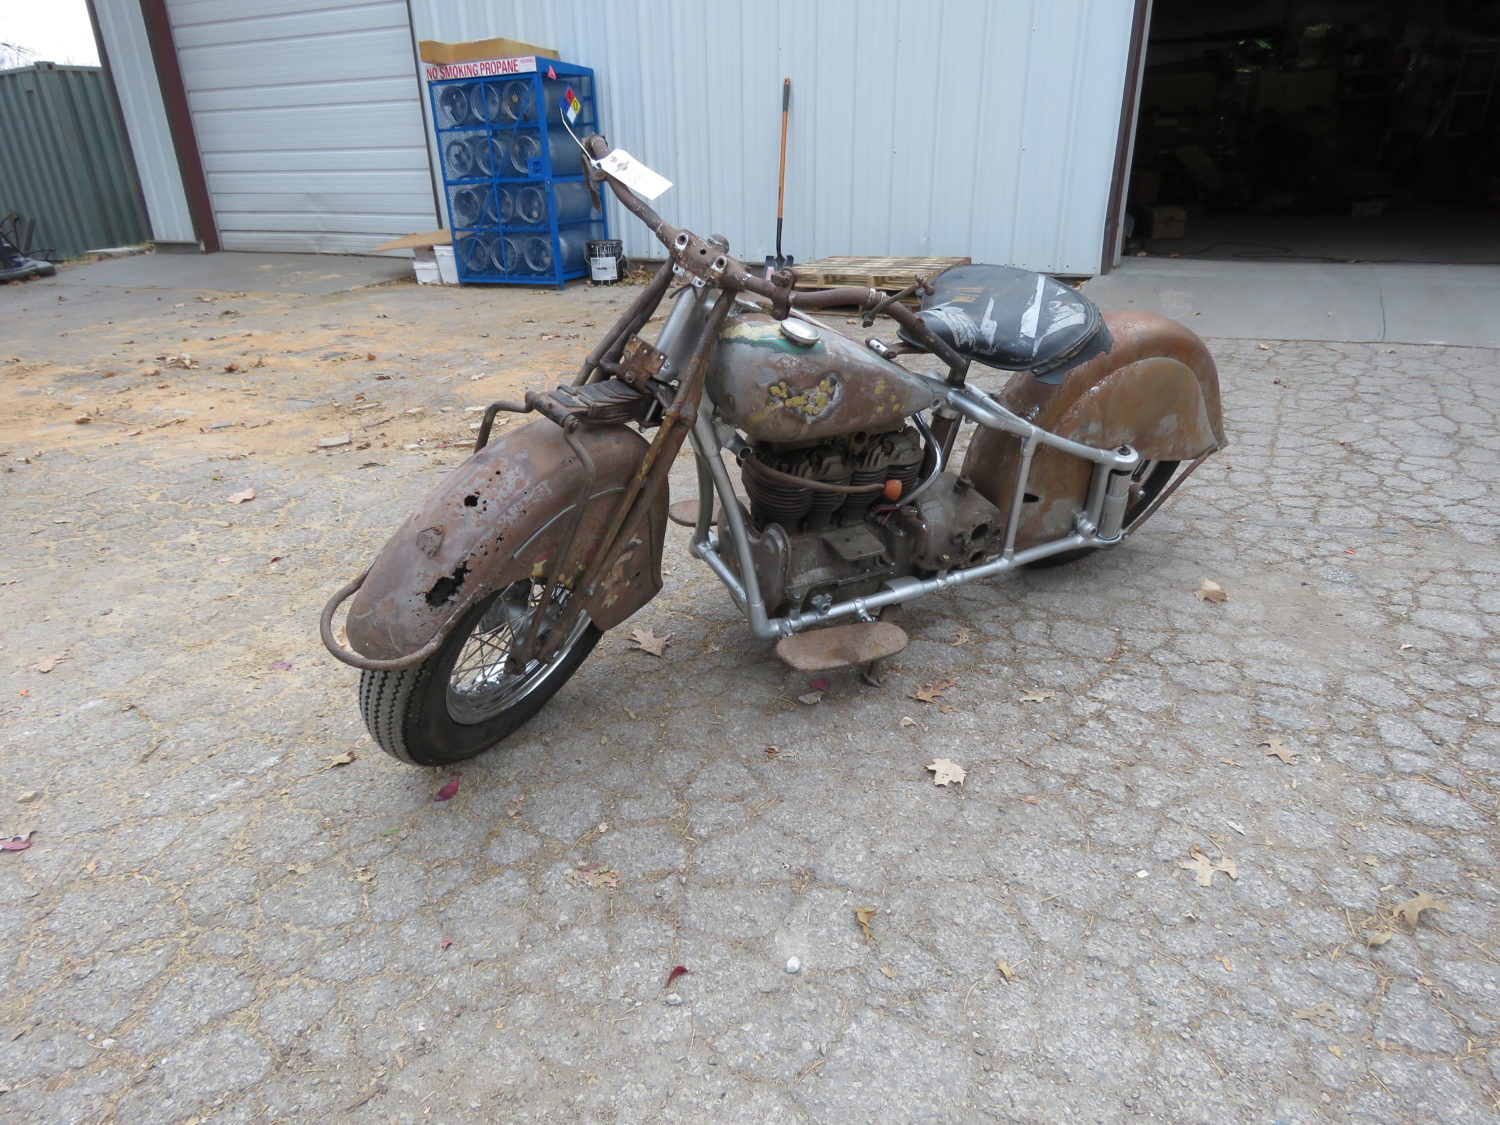 The K.C. Motorcycle Collection Auction- Motorcycles, Memorabilia, and HUGE Harley DavidsonParts Stash! - image 2